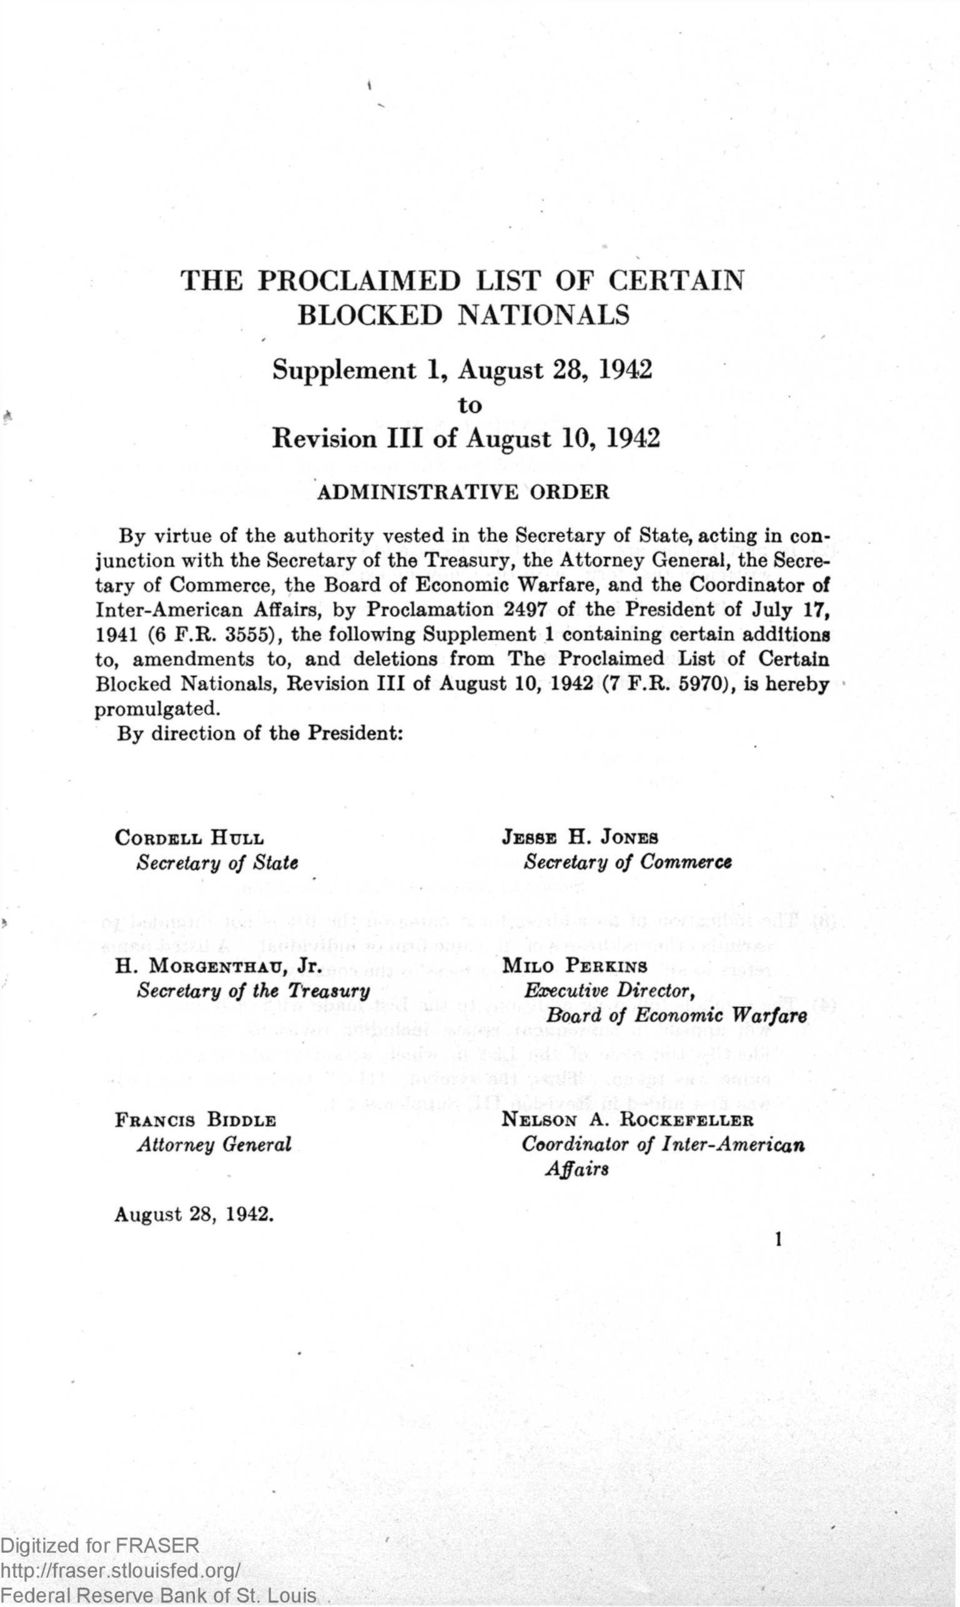 Proclamation 2497 of the President of July 17, 1941 (6 F.R.